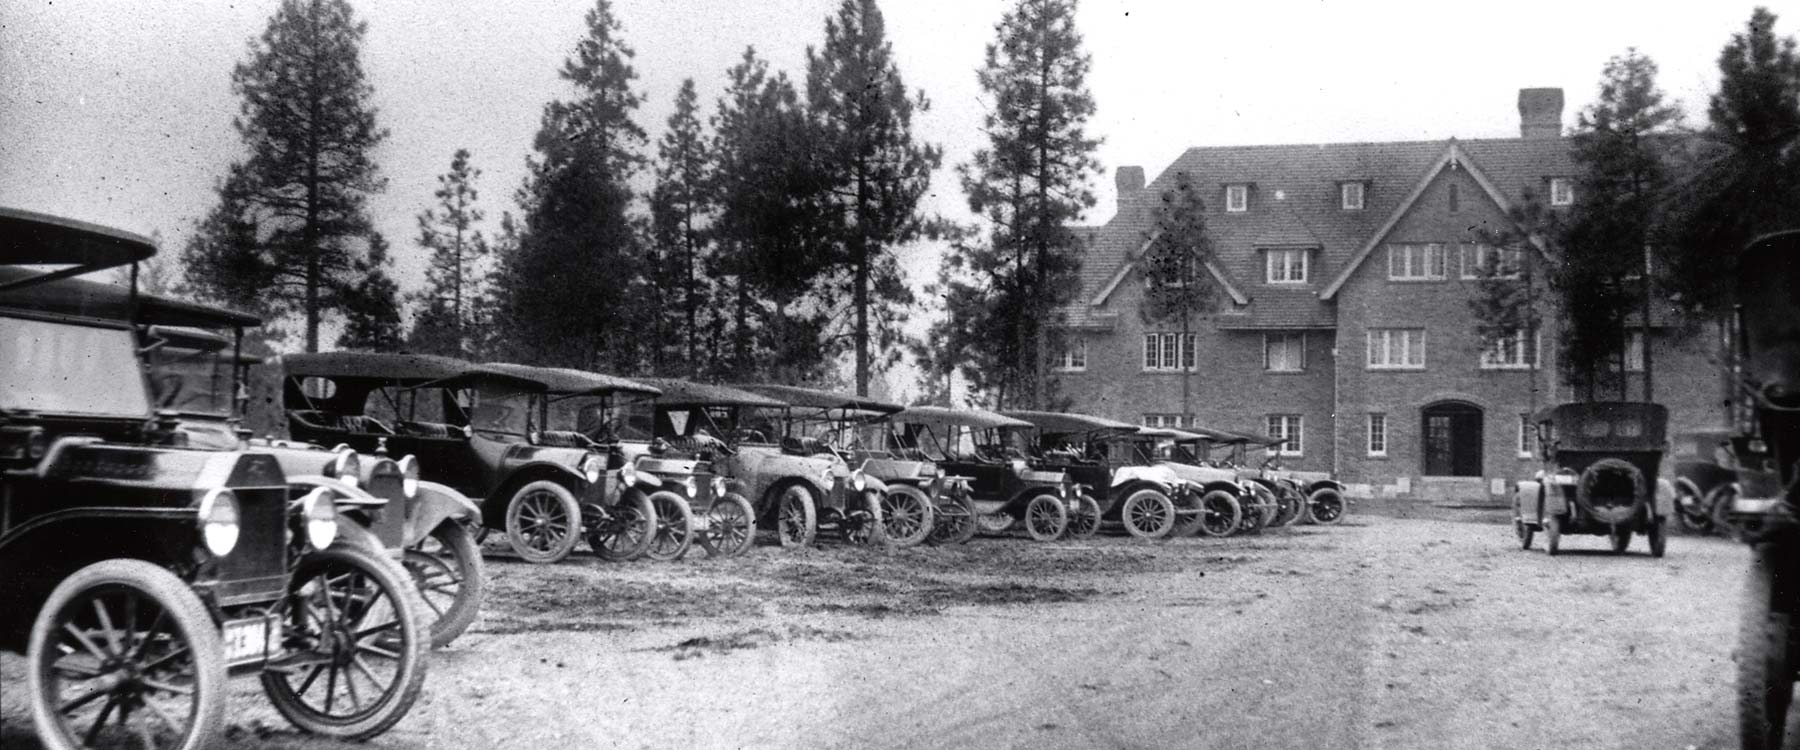 Vintage black-and-white photo of an original Whitworth academic building with 1920-30s-style cars parked outside.